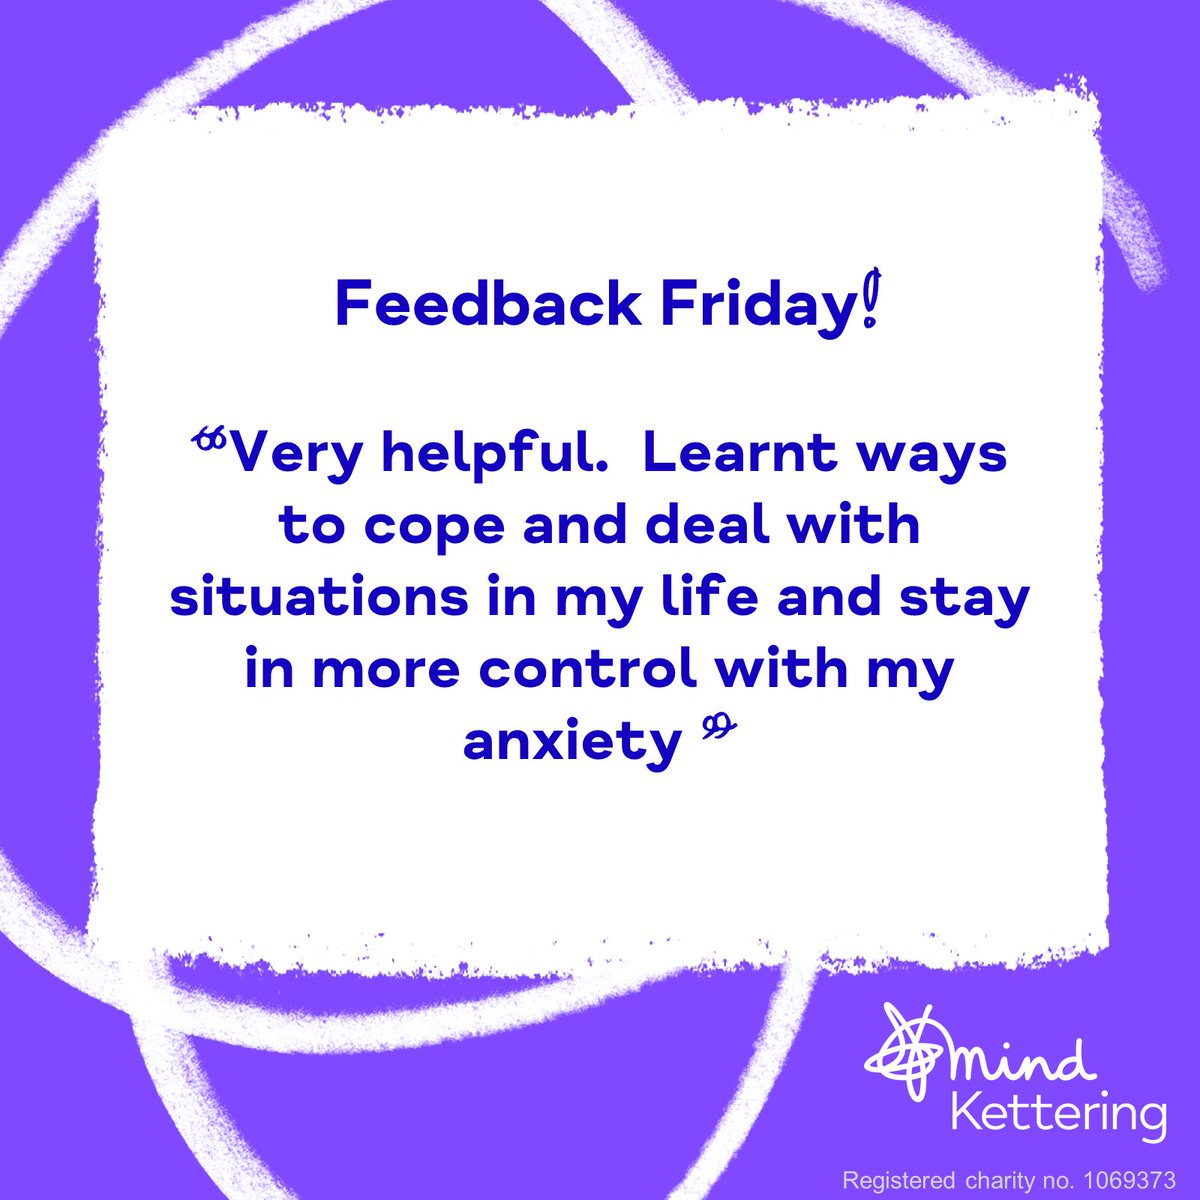 Today’s feedback comes from an Individual who recently attended our anxiety management course. 'Very helpful. Learnt ways to cope and deal with situations in my life and stay in more control with my anxiety'. ketteringmind.org.uk/support-and-se…